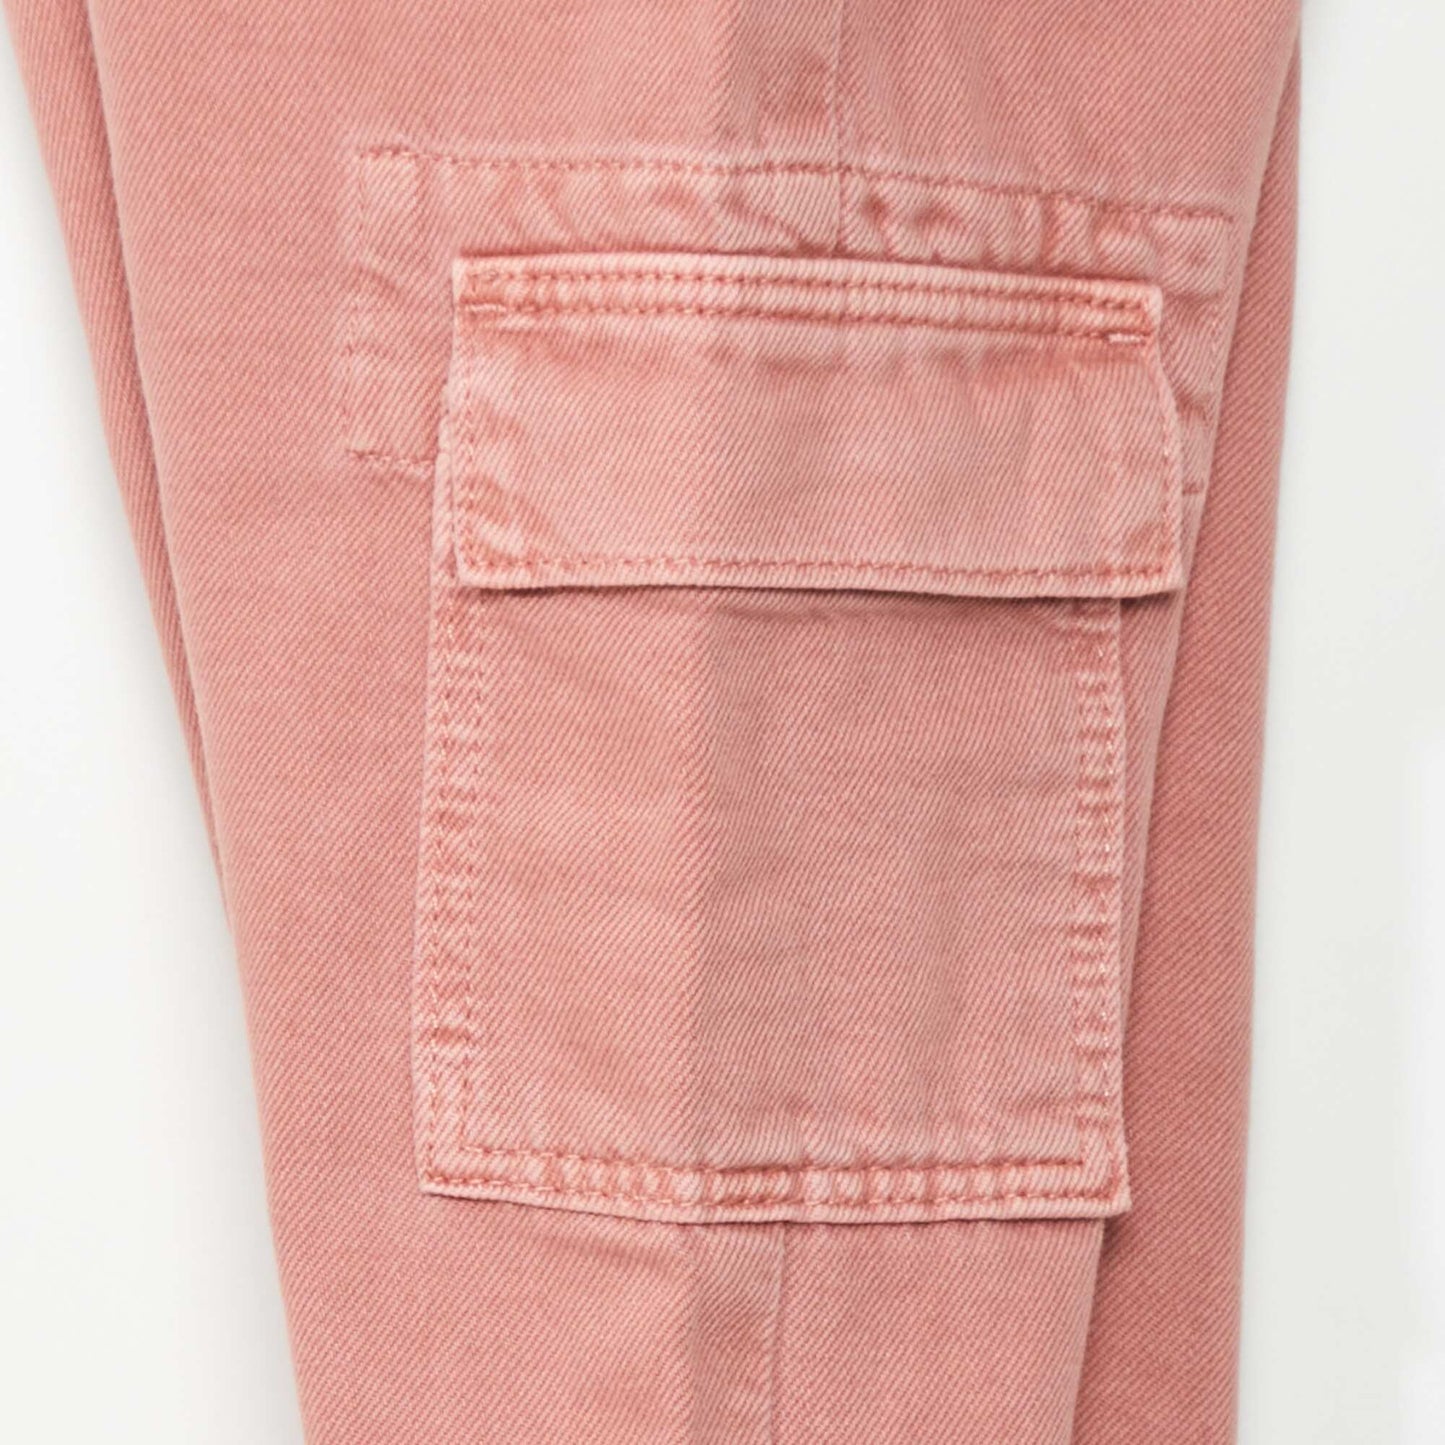 Wide-leg jeans with side pockets PINK